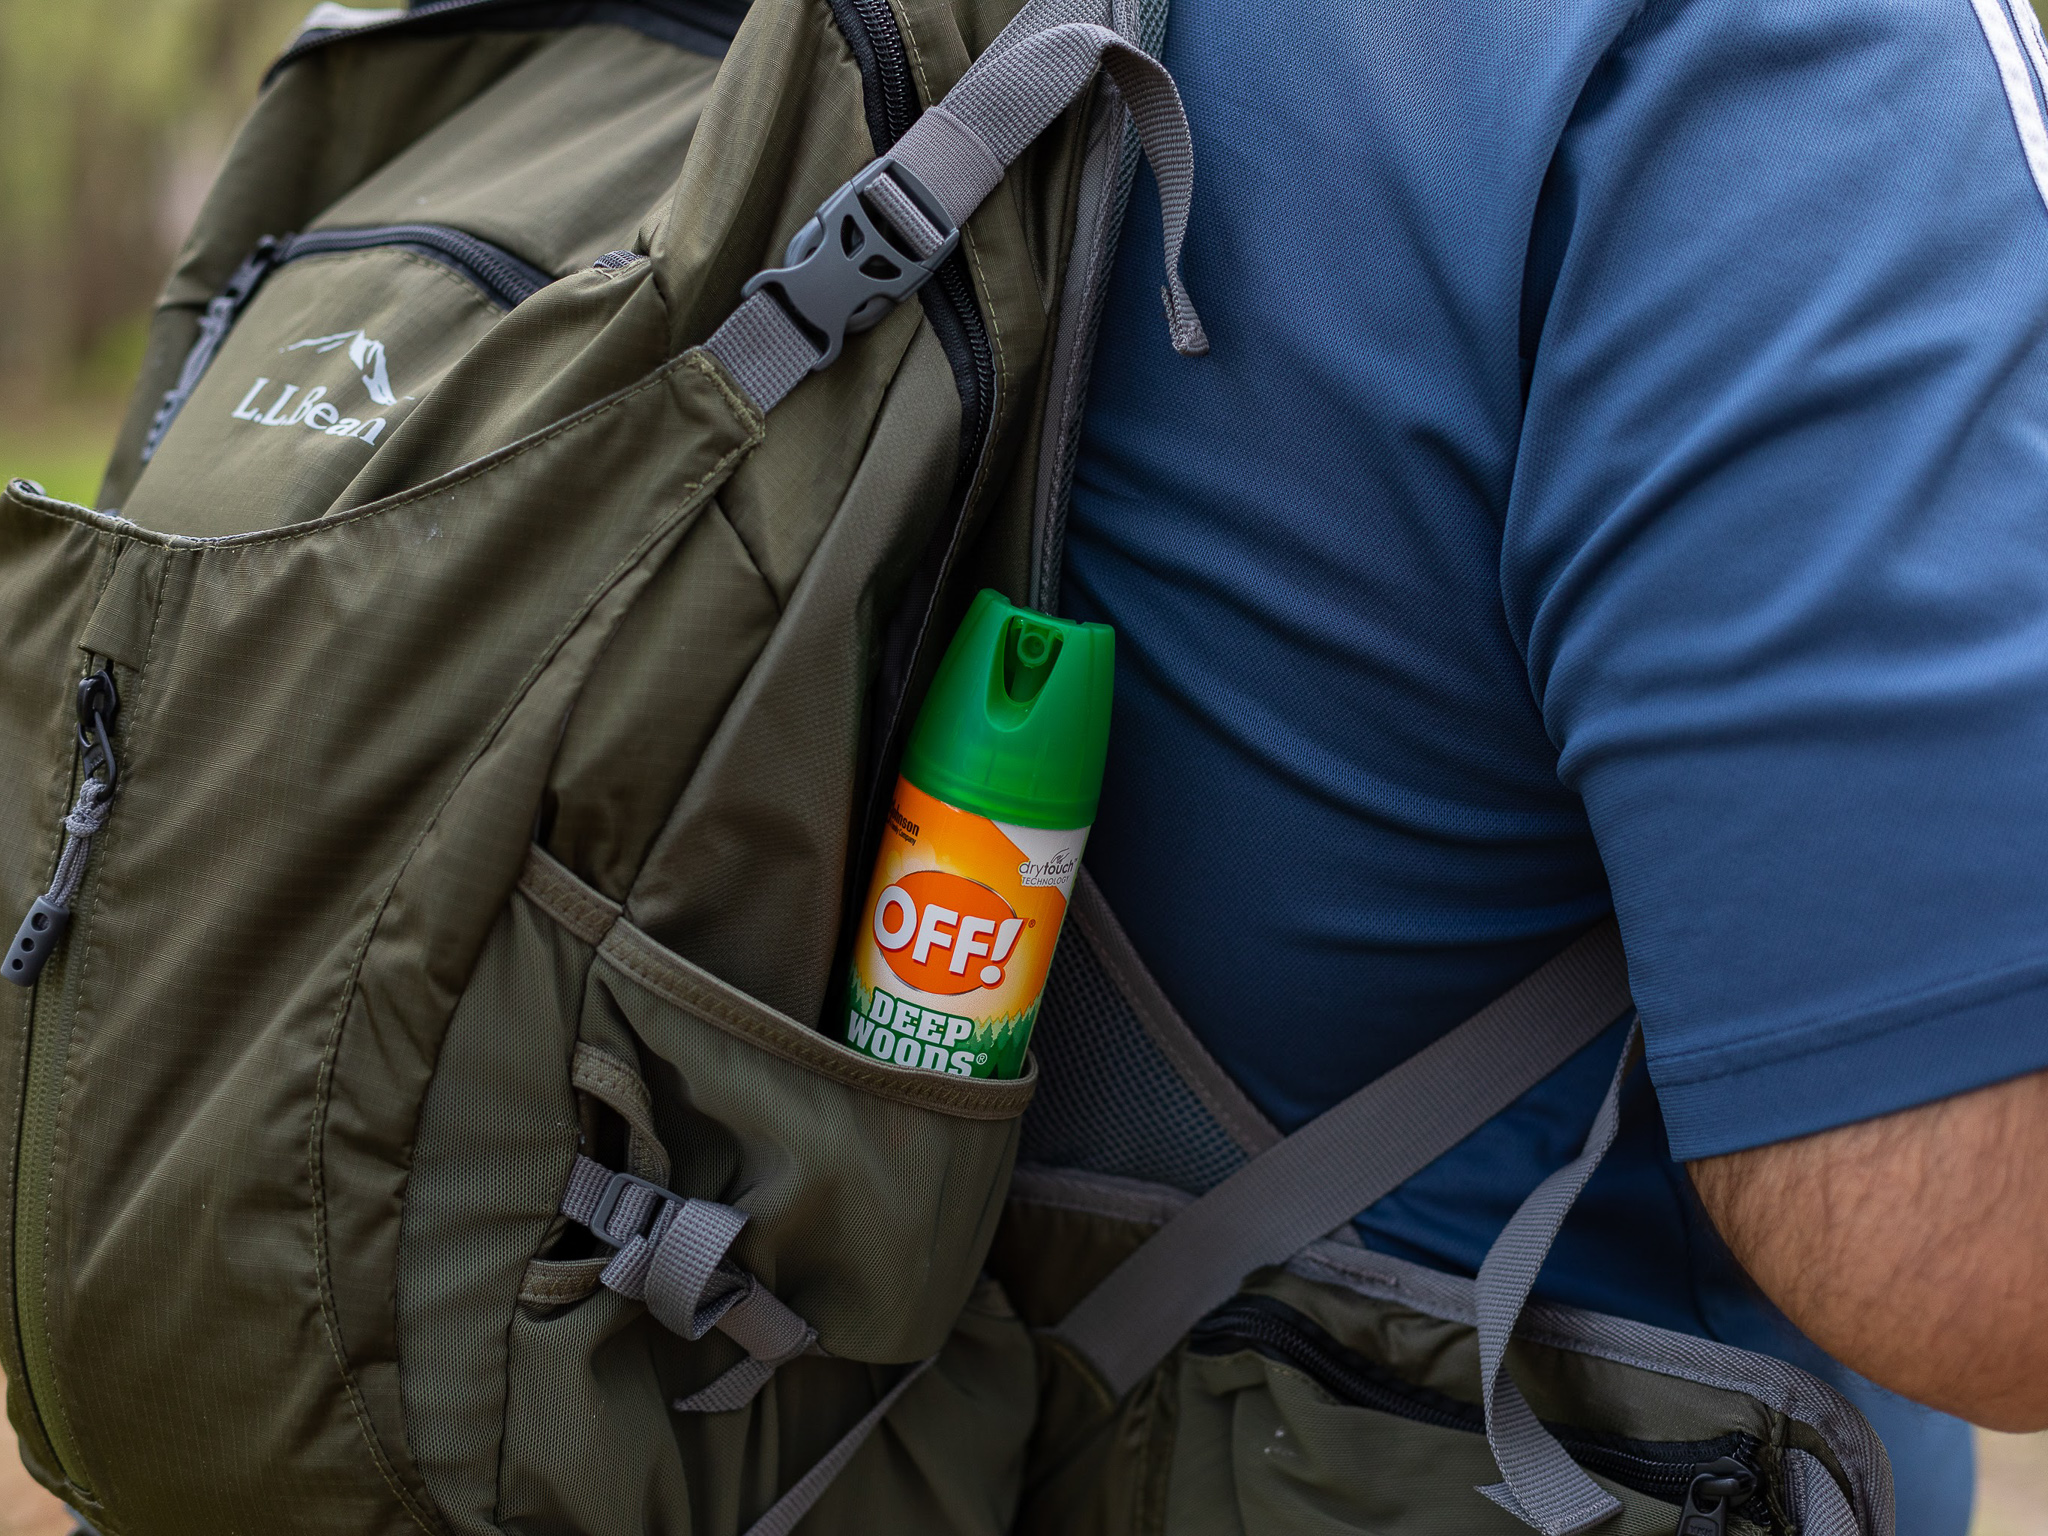 Grab Savings On OFF!® Deep Woods Repellent – Protect Your Family From Insects All Summer Long!